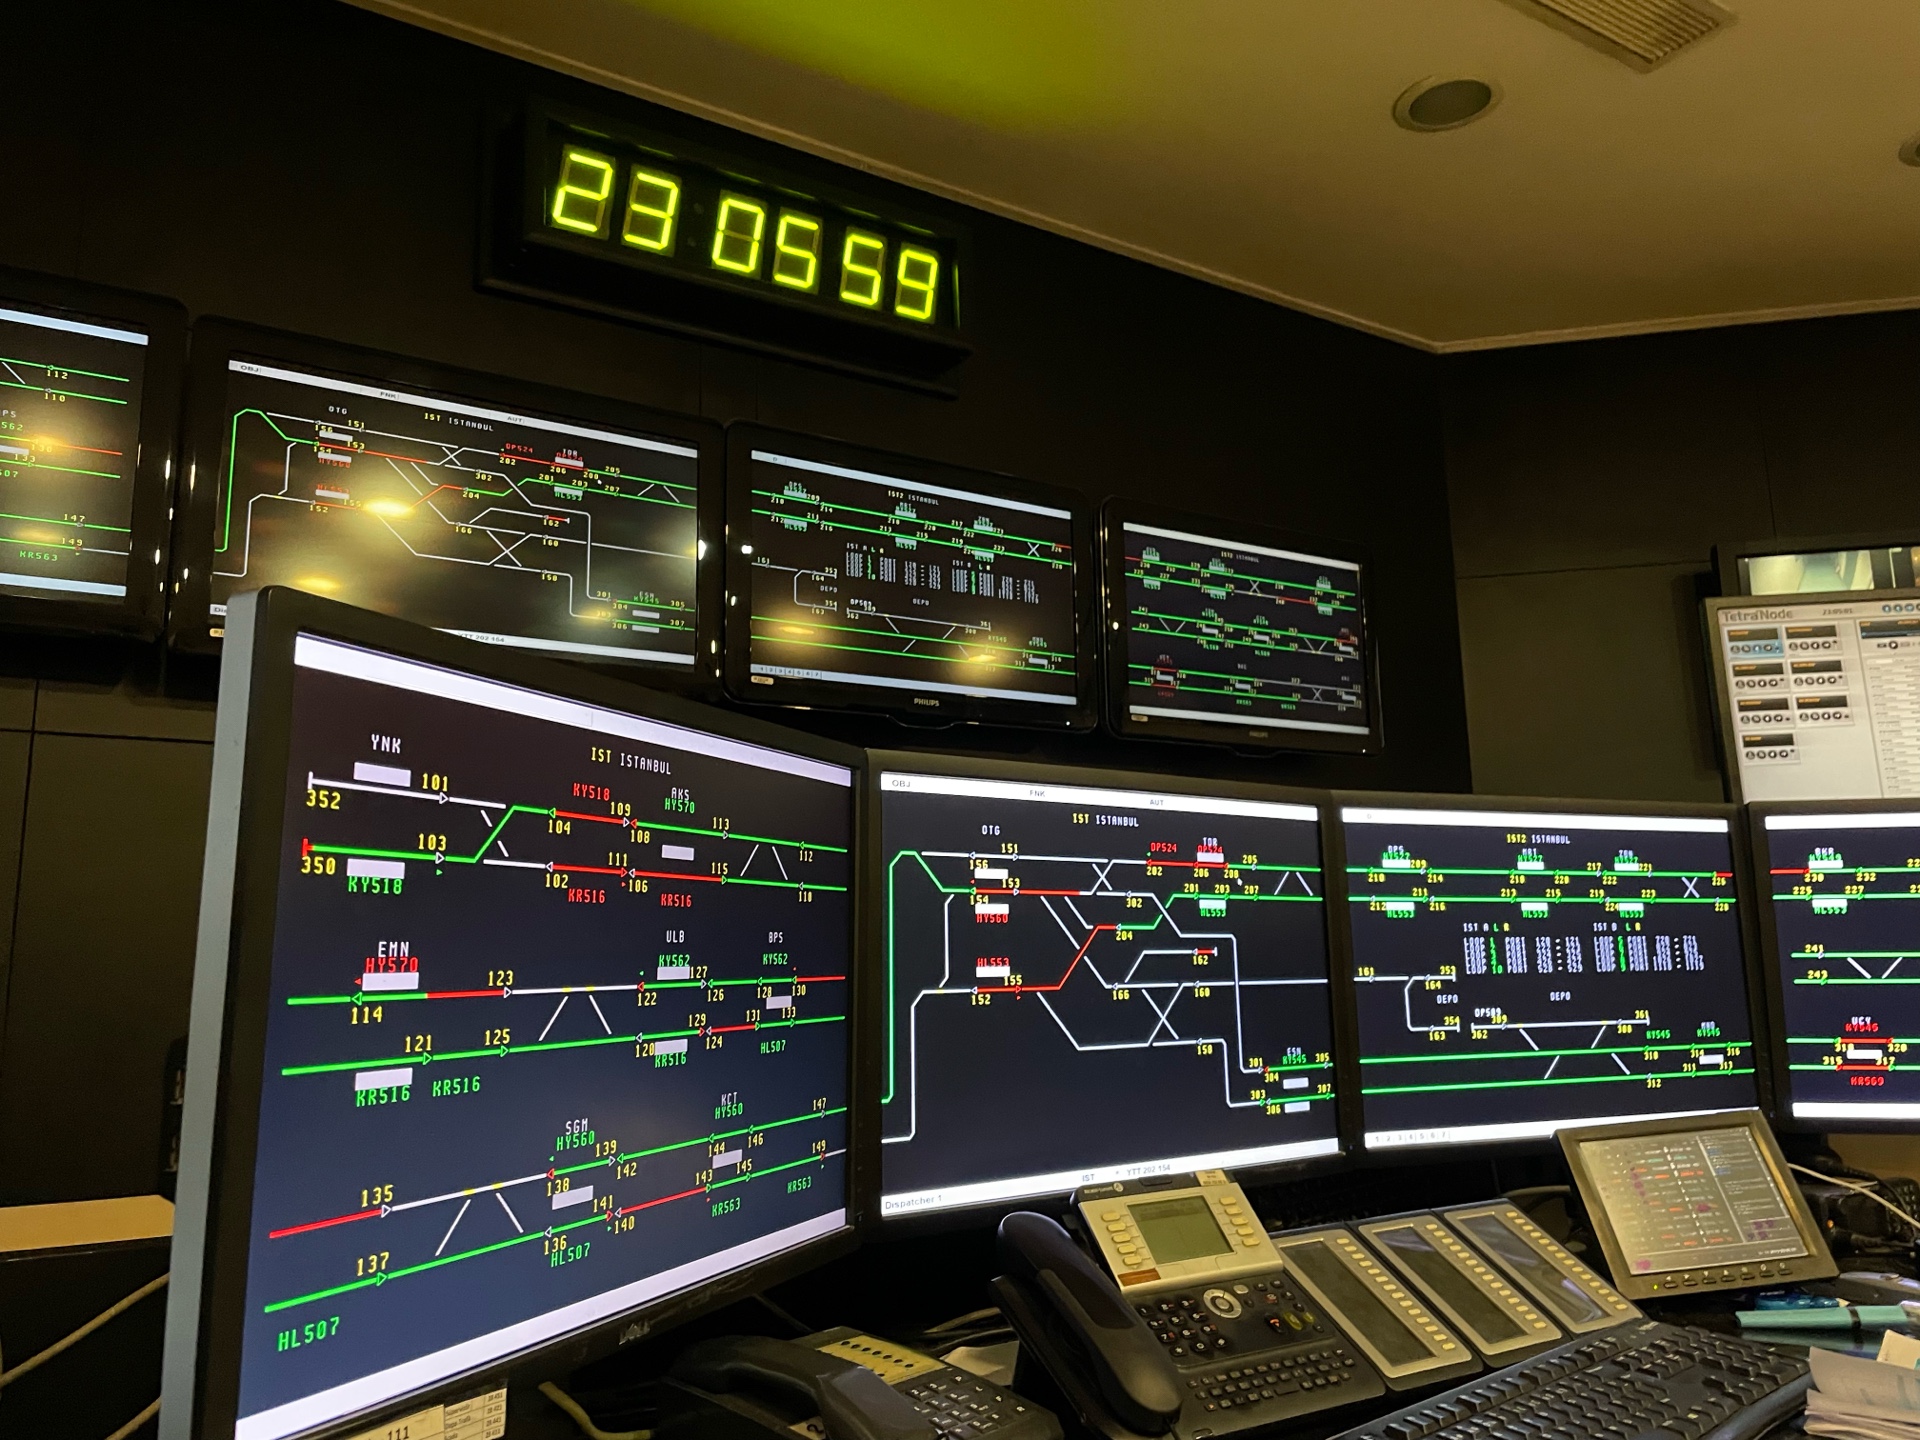 Dispatcher interface of the Istanbul Metro M1 line